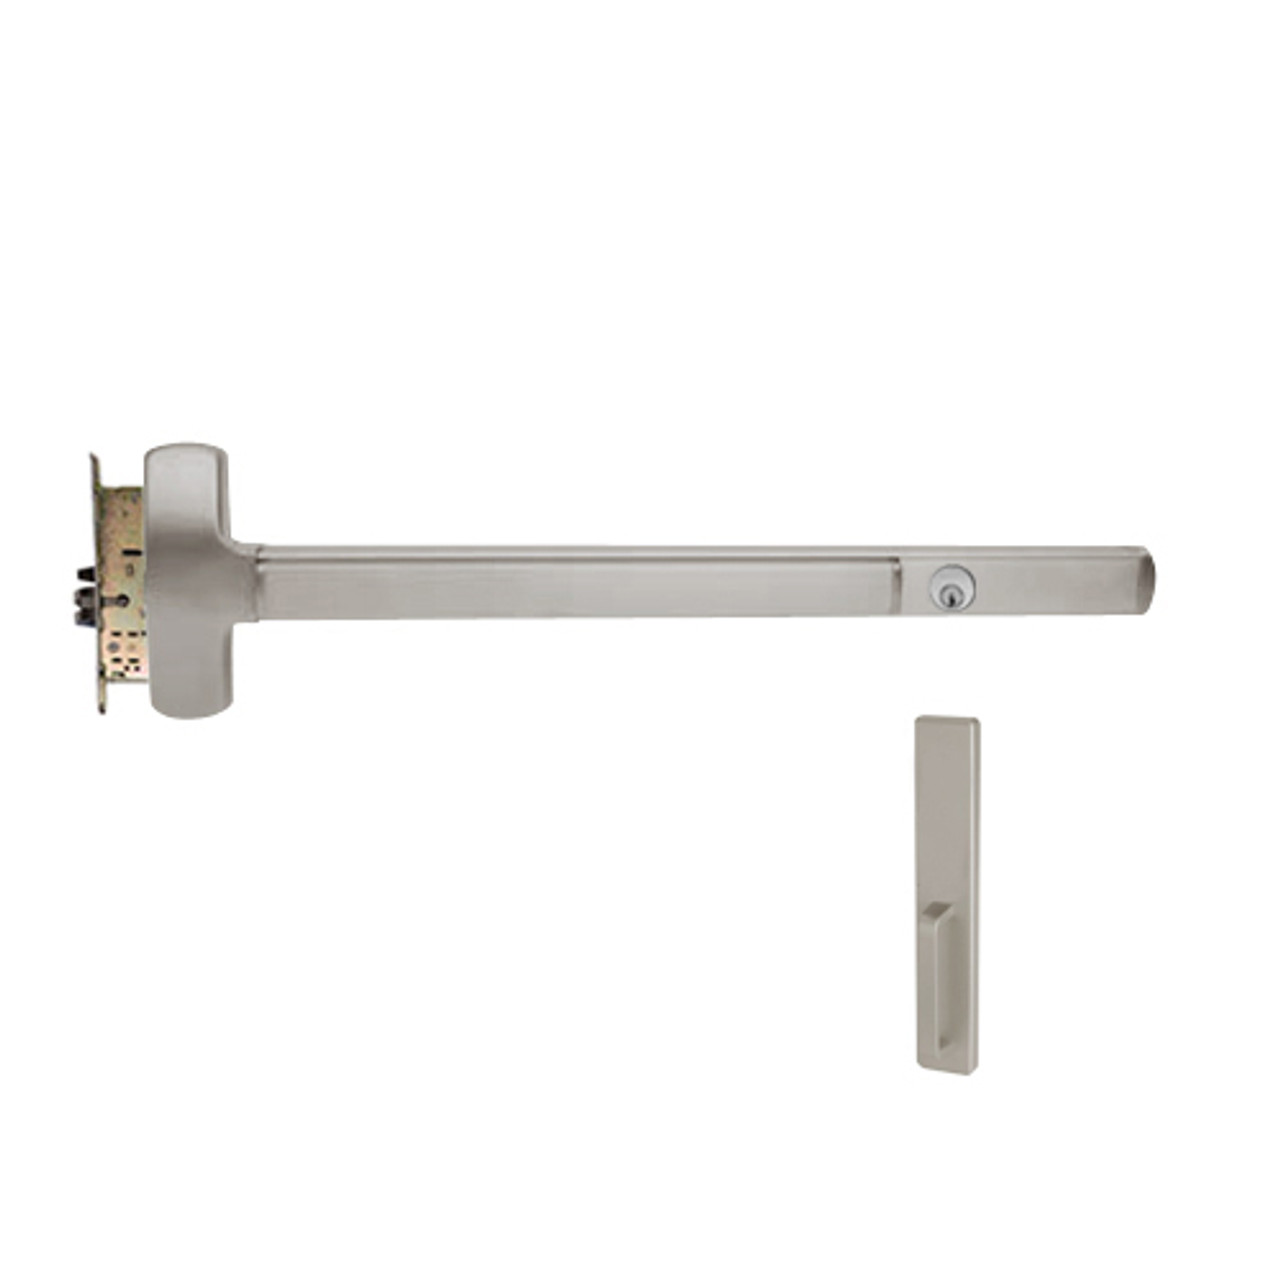 CD25-M-DT-US32D-3-RHR Falcon Exit Device in Satin Stainless Steel